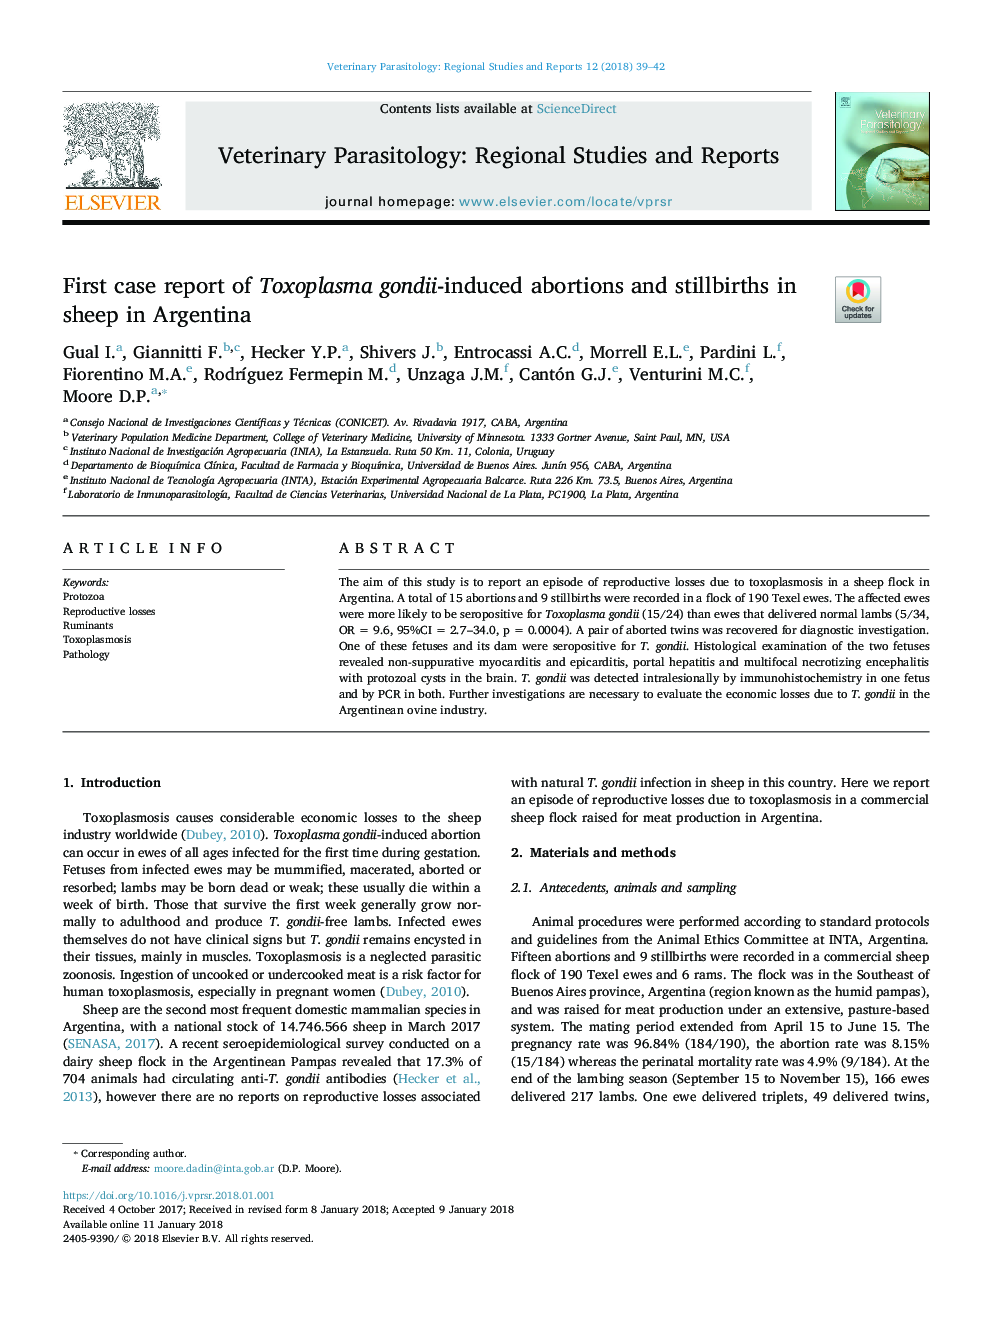 First case report of Toxoplasma gondii-induced abortions and stillbirths in sheep in Argentina